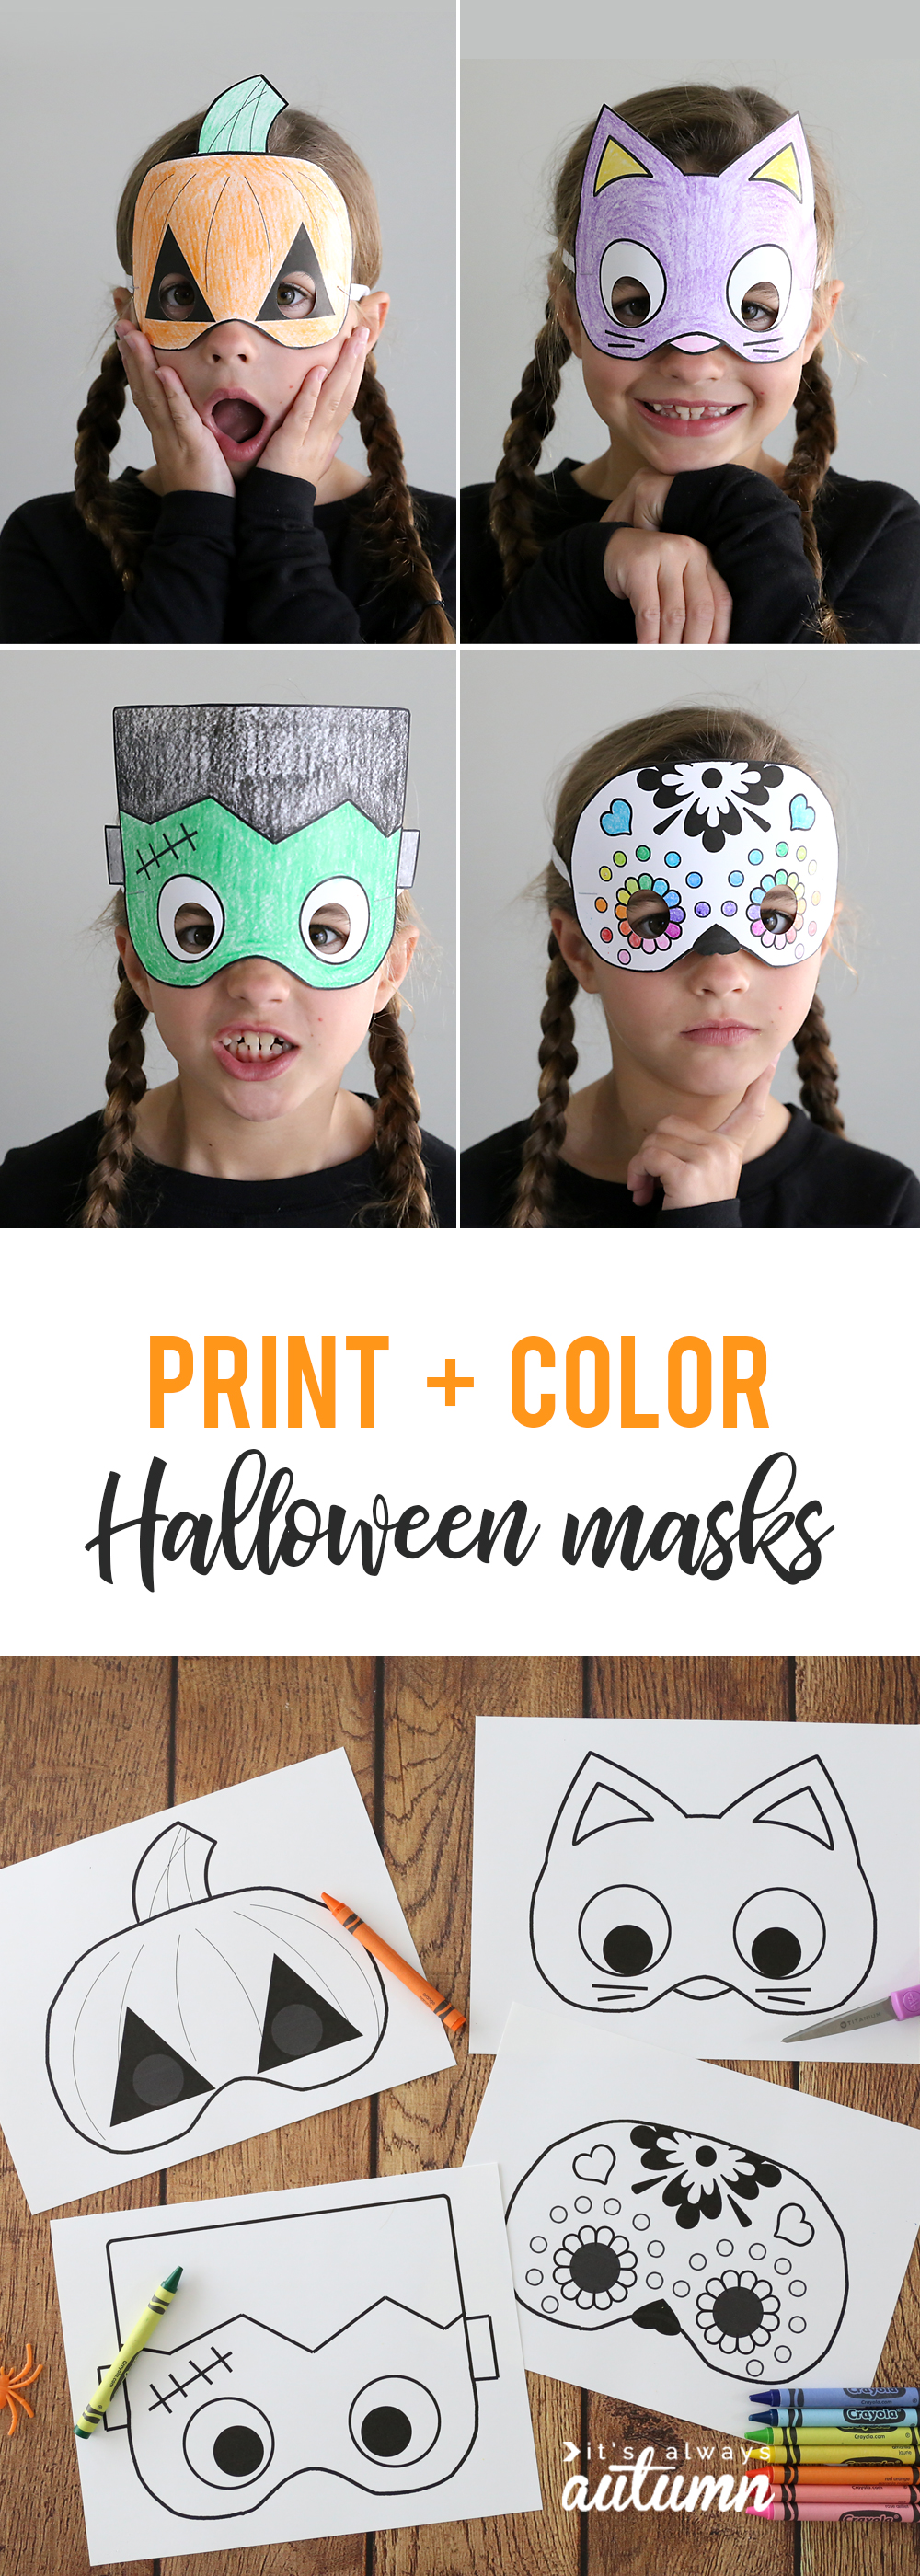 Girl wearing print and color Halloween masks